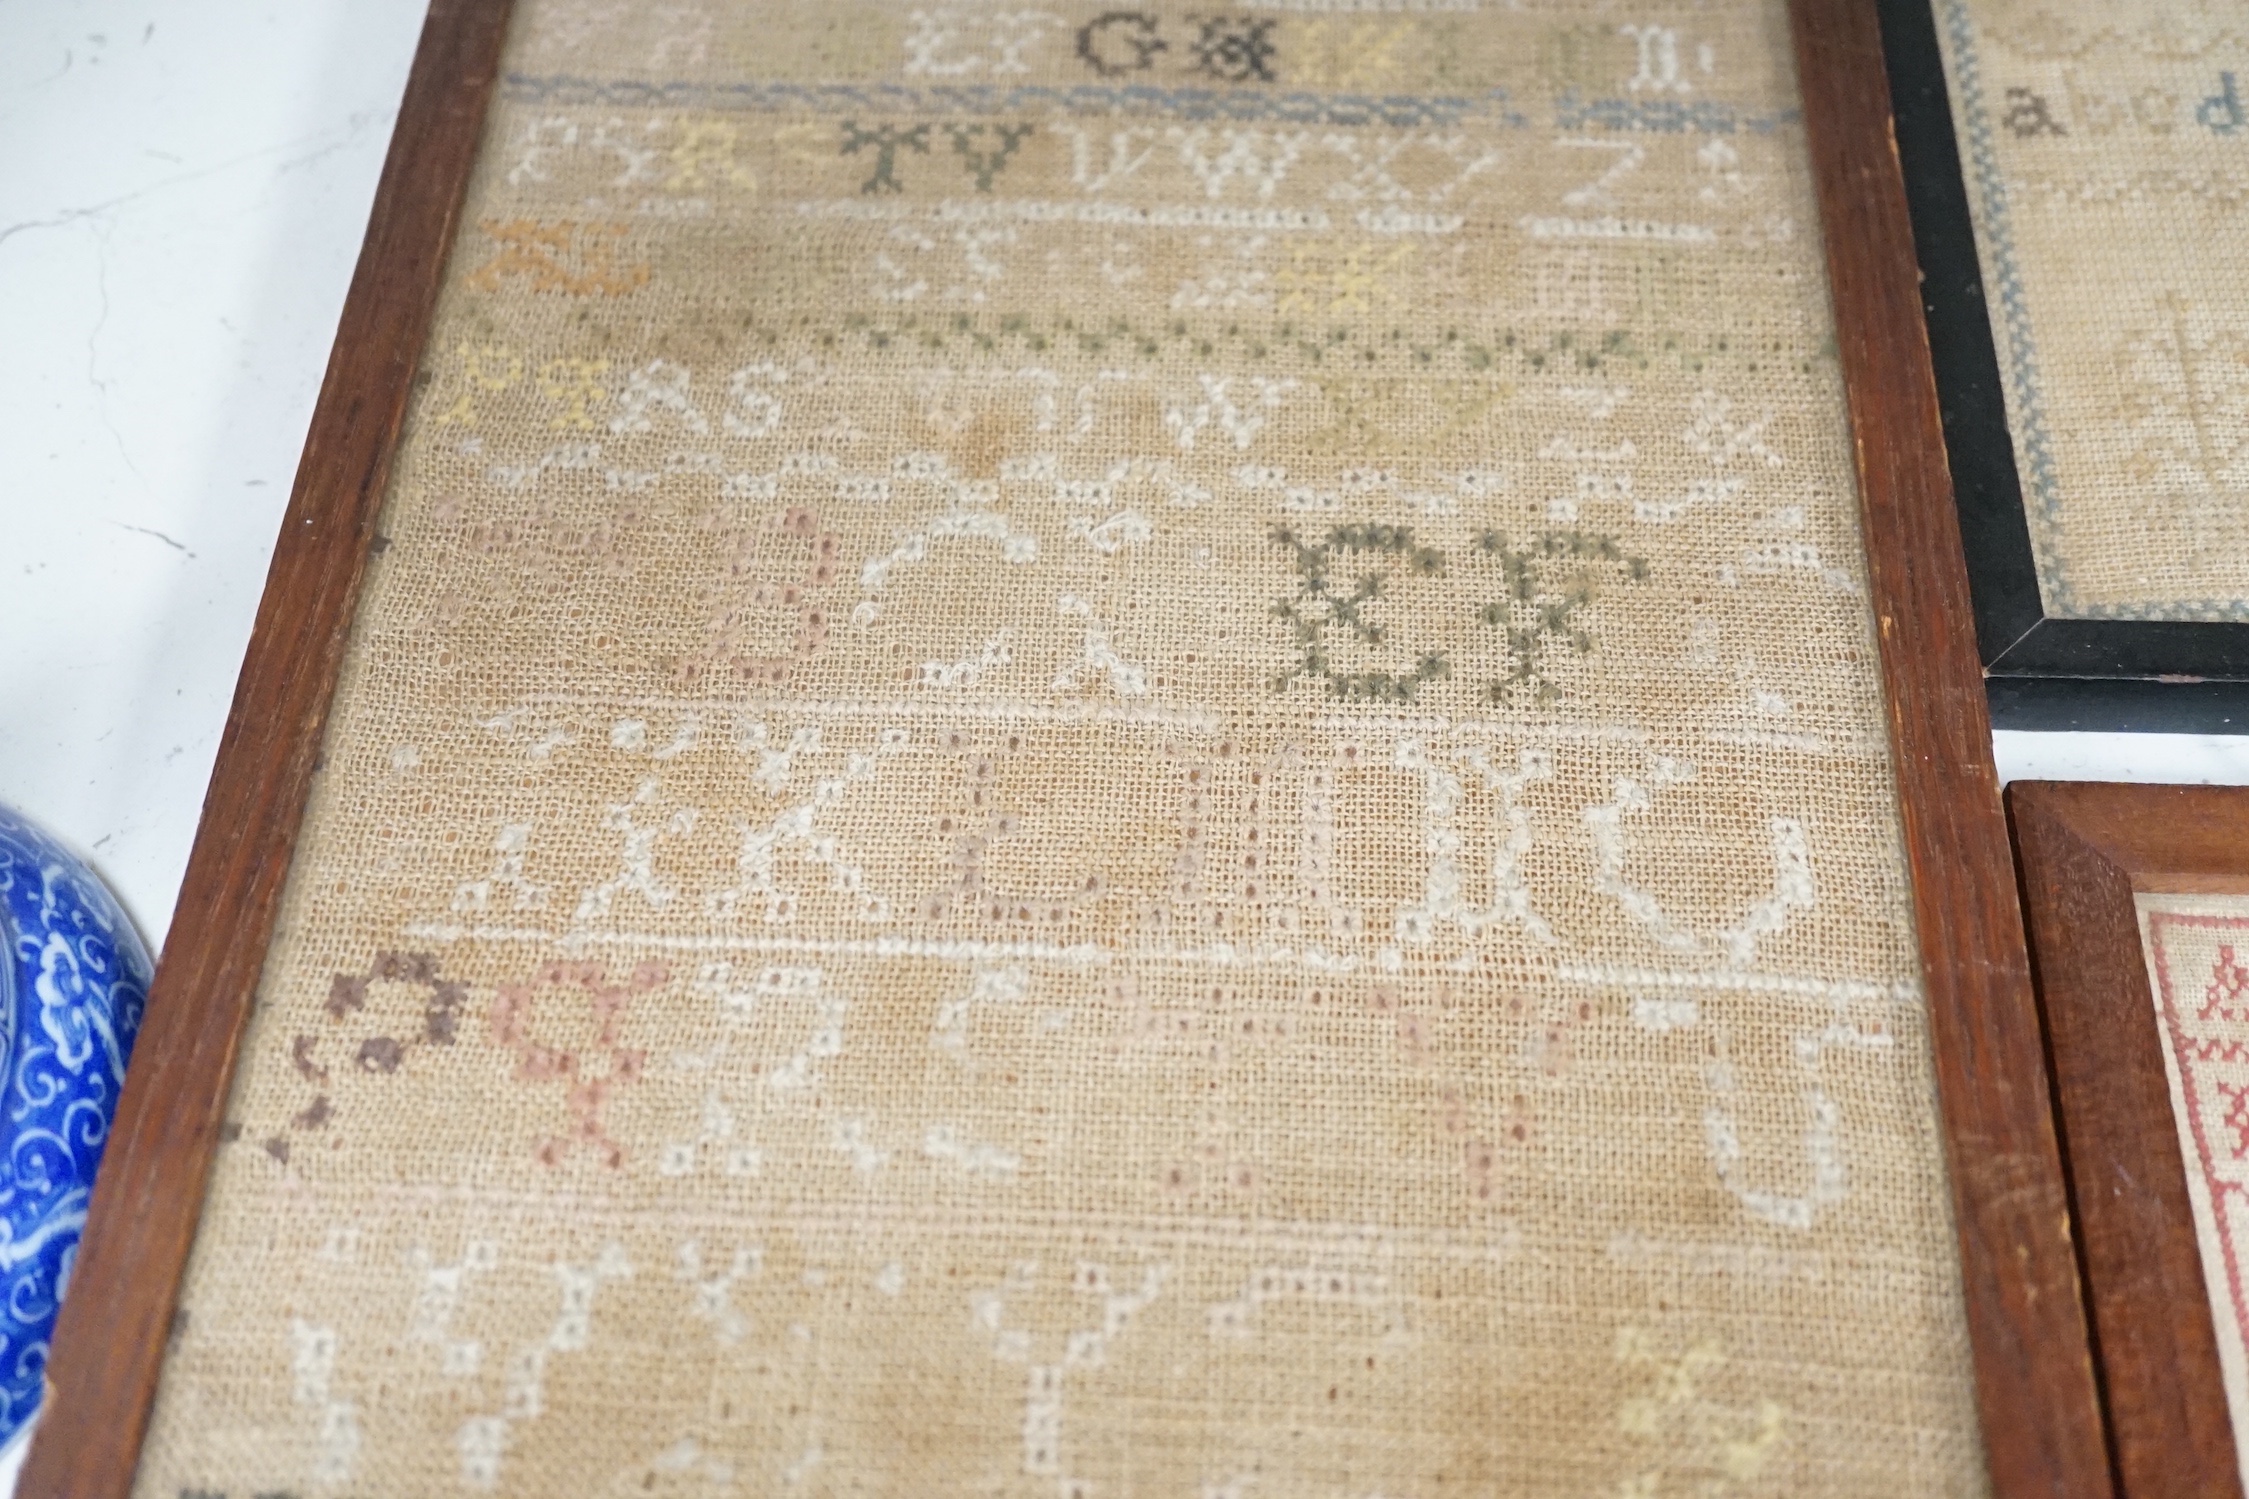 An unusual William IV ‘Register of birth’ small sampler together with four other samplers ranging in date from 1778 to 1851, largest 56 cm x 20.5 cm (5)